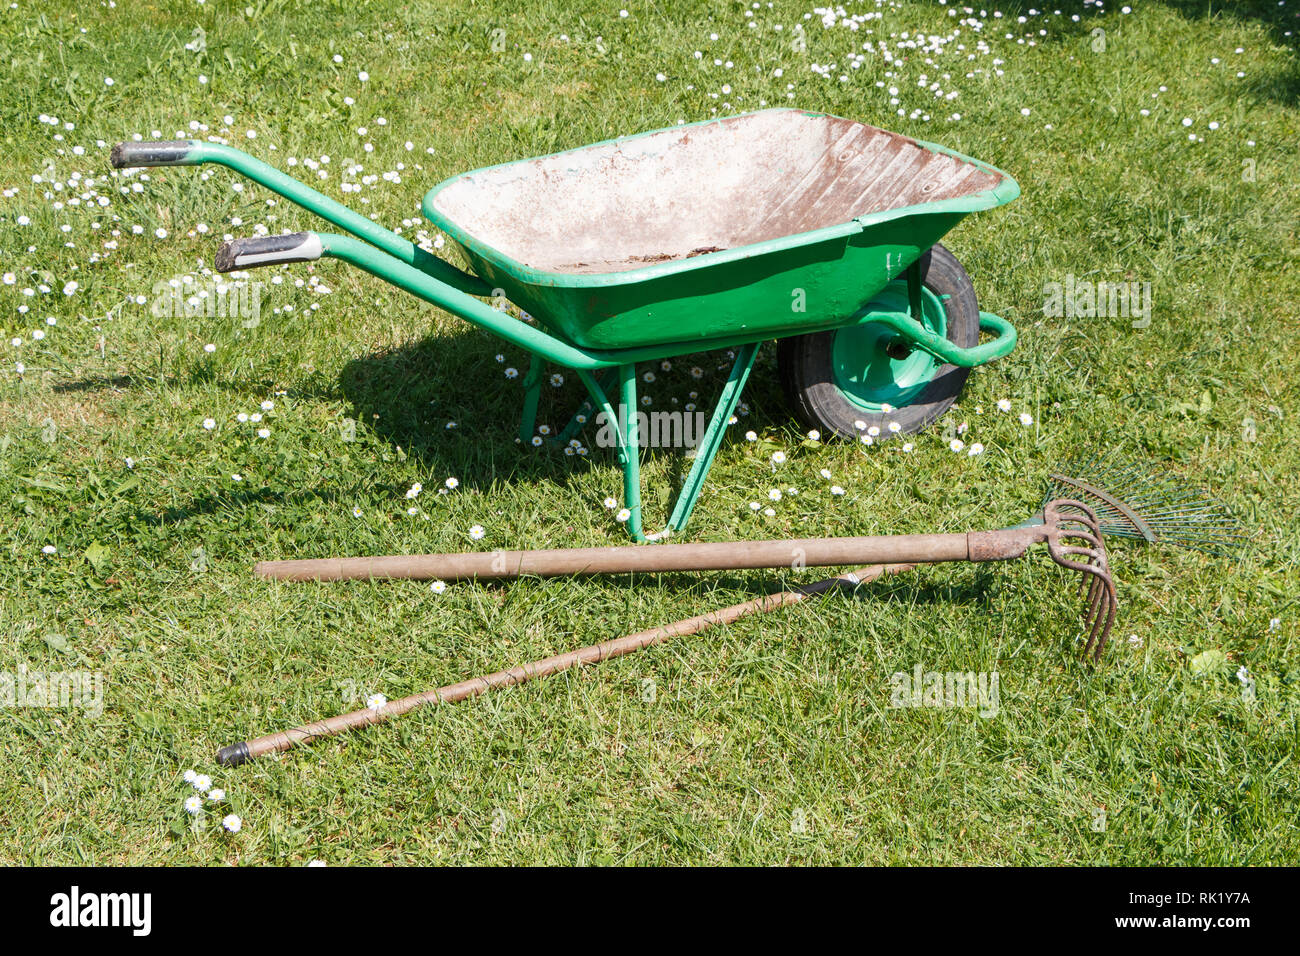 Green wheelbarrow with lawn rake and claw cultivator in a garden Stock Photo